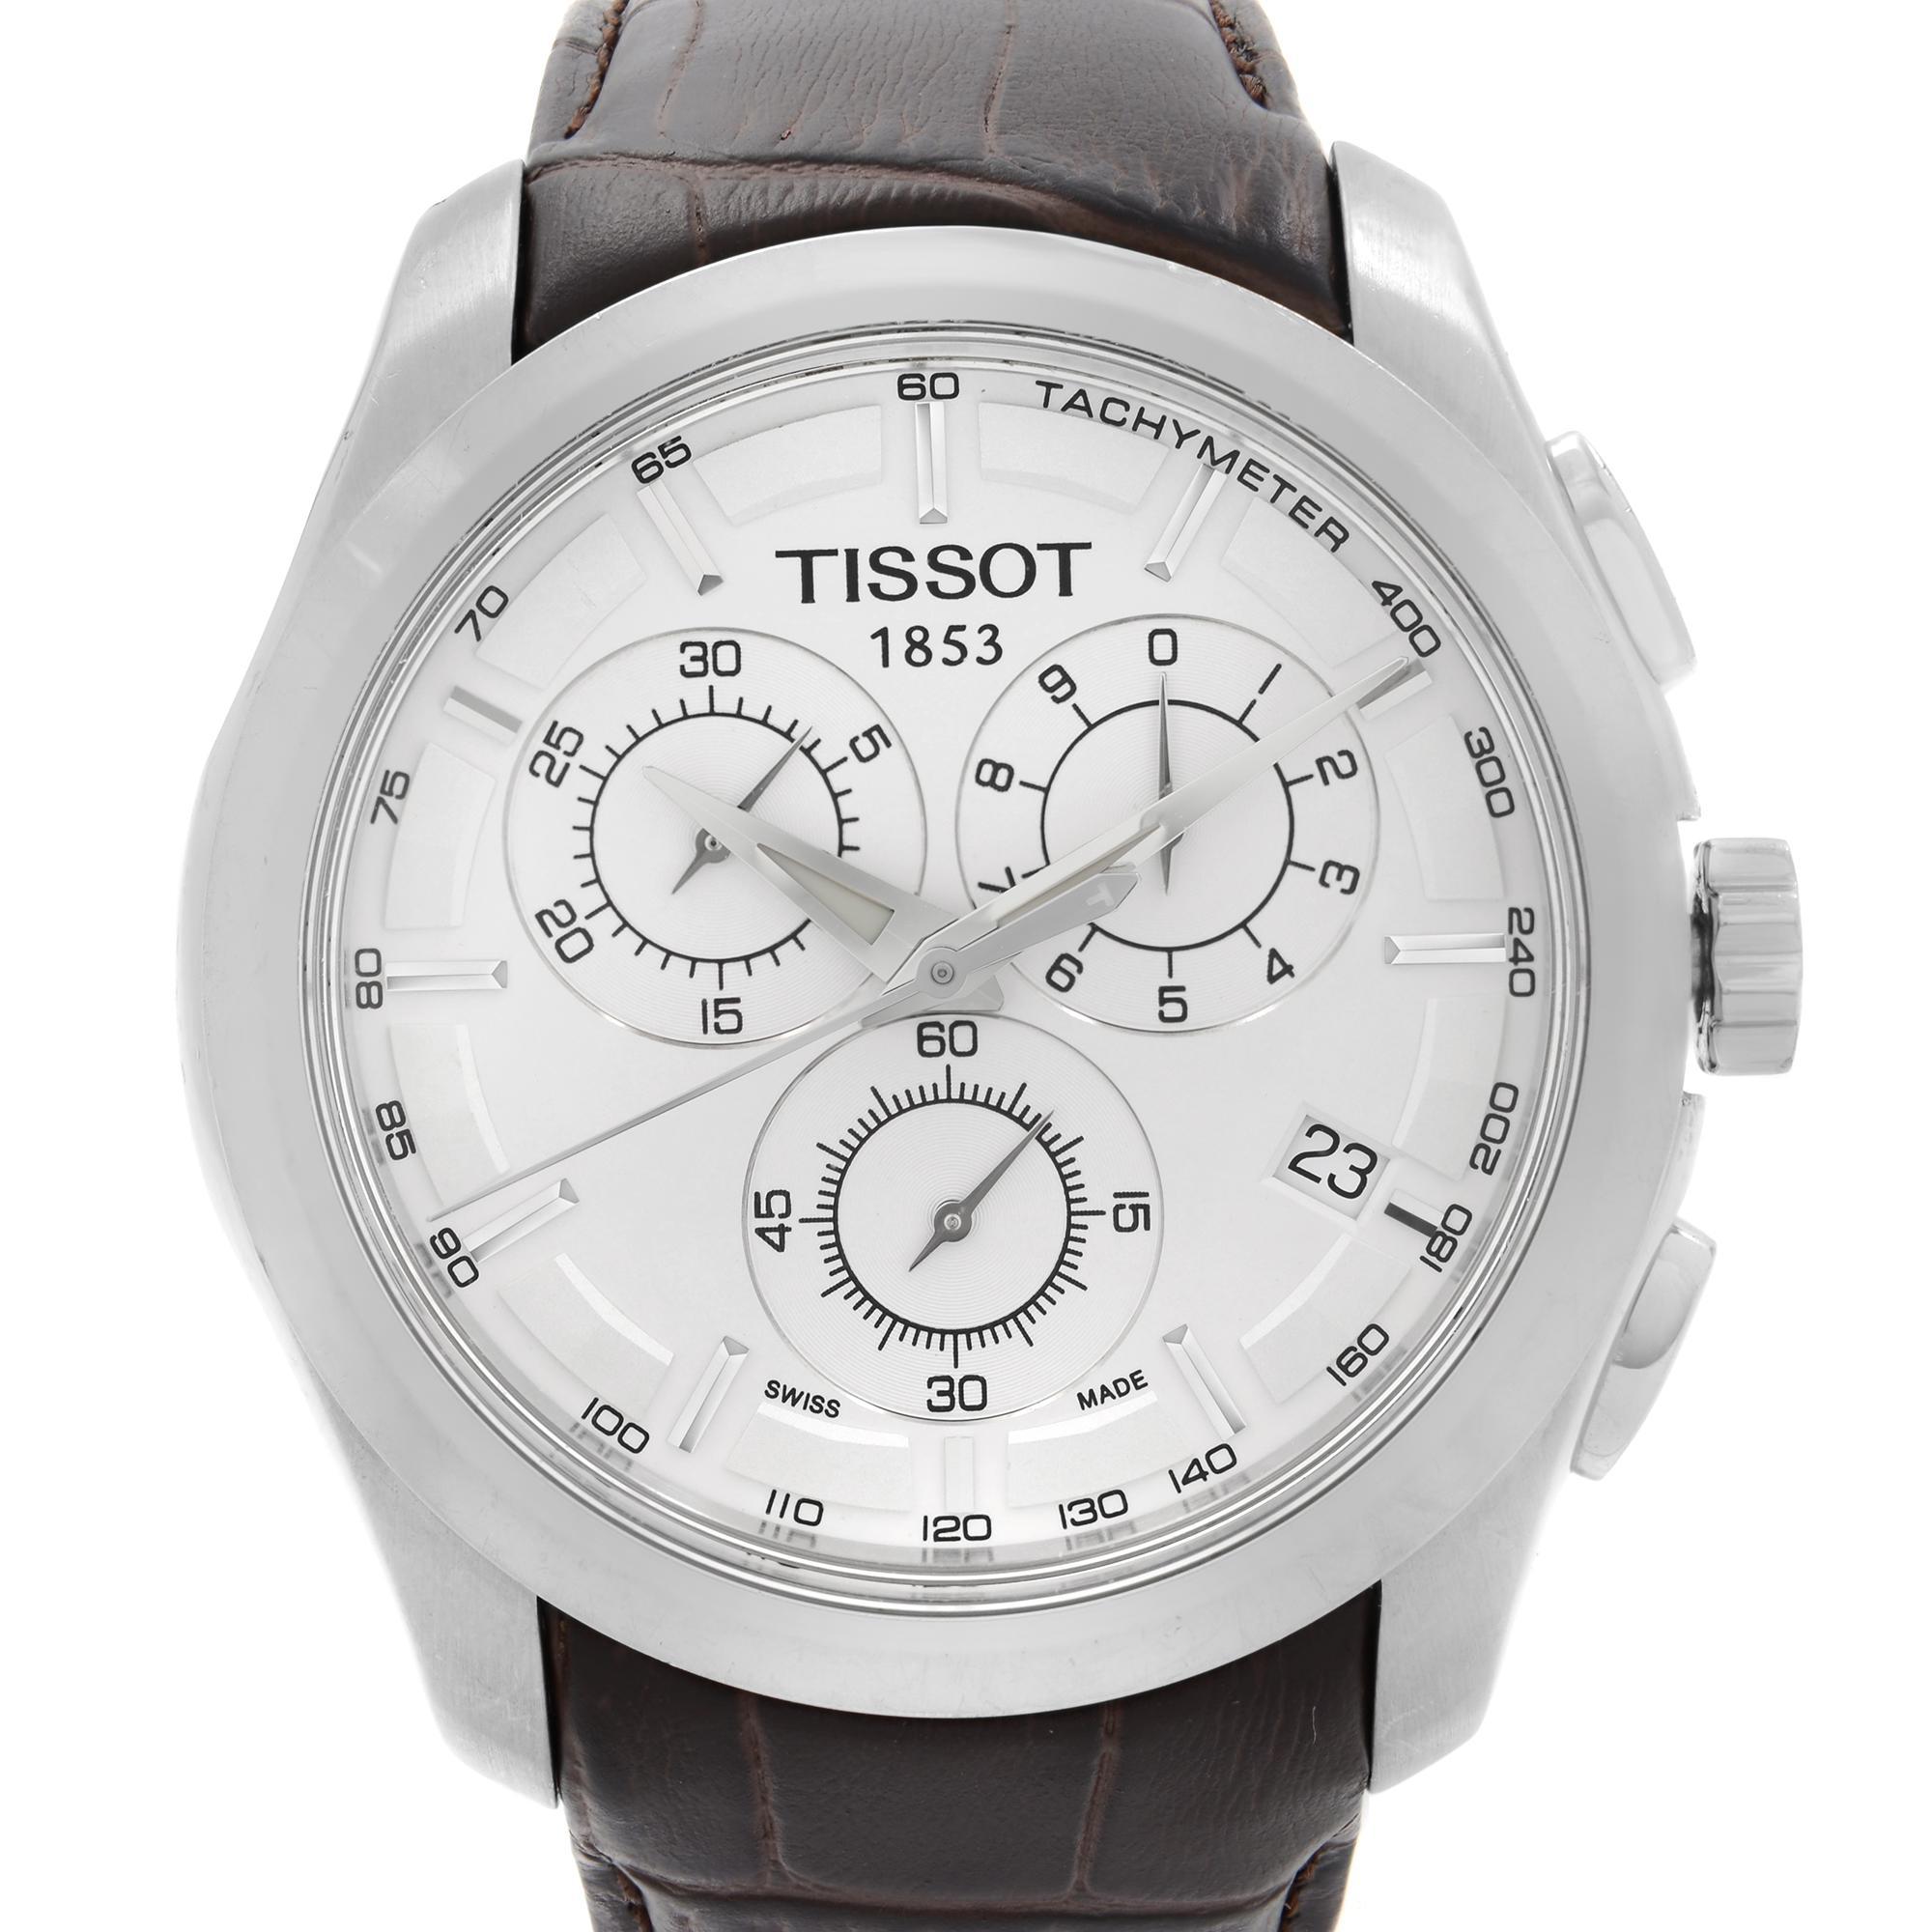 Pre-owned Tissot Couturier Chronograph White Dial Leather Strap Watch T035.617.16.031.00. Scratches on the Bezel and Nicks on the Case. Insignifiicanty blemishes on the inner side of the strap. This Beautiful Timepiece is Powered by Quartz (Battery)